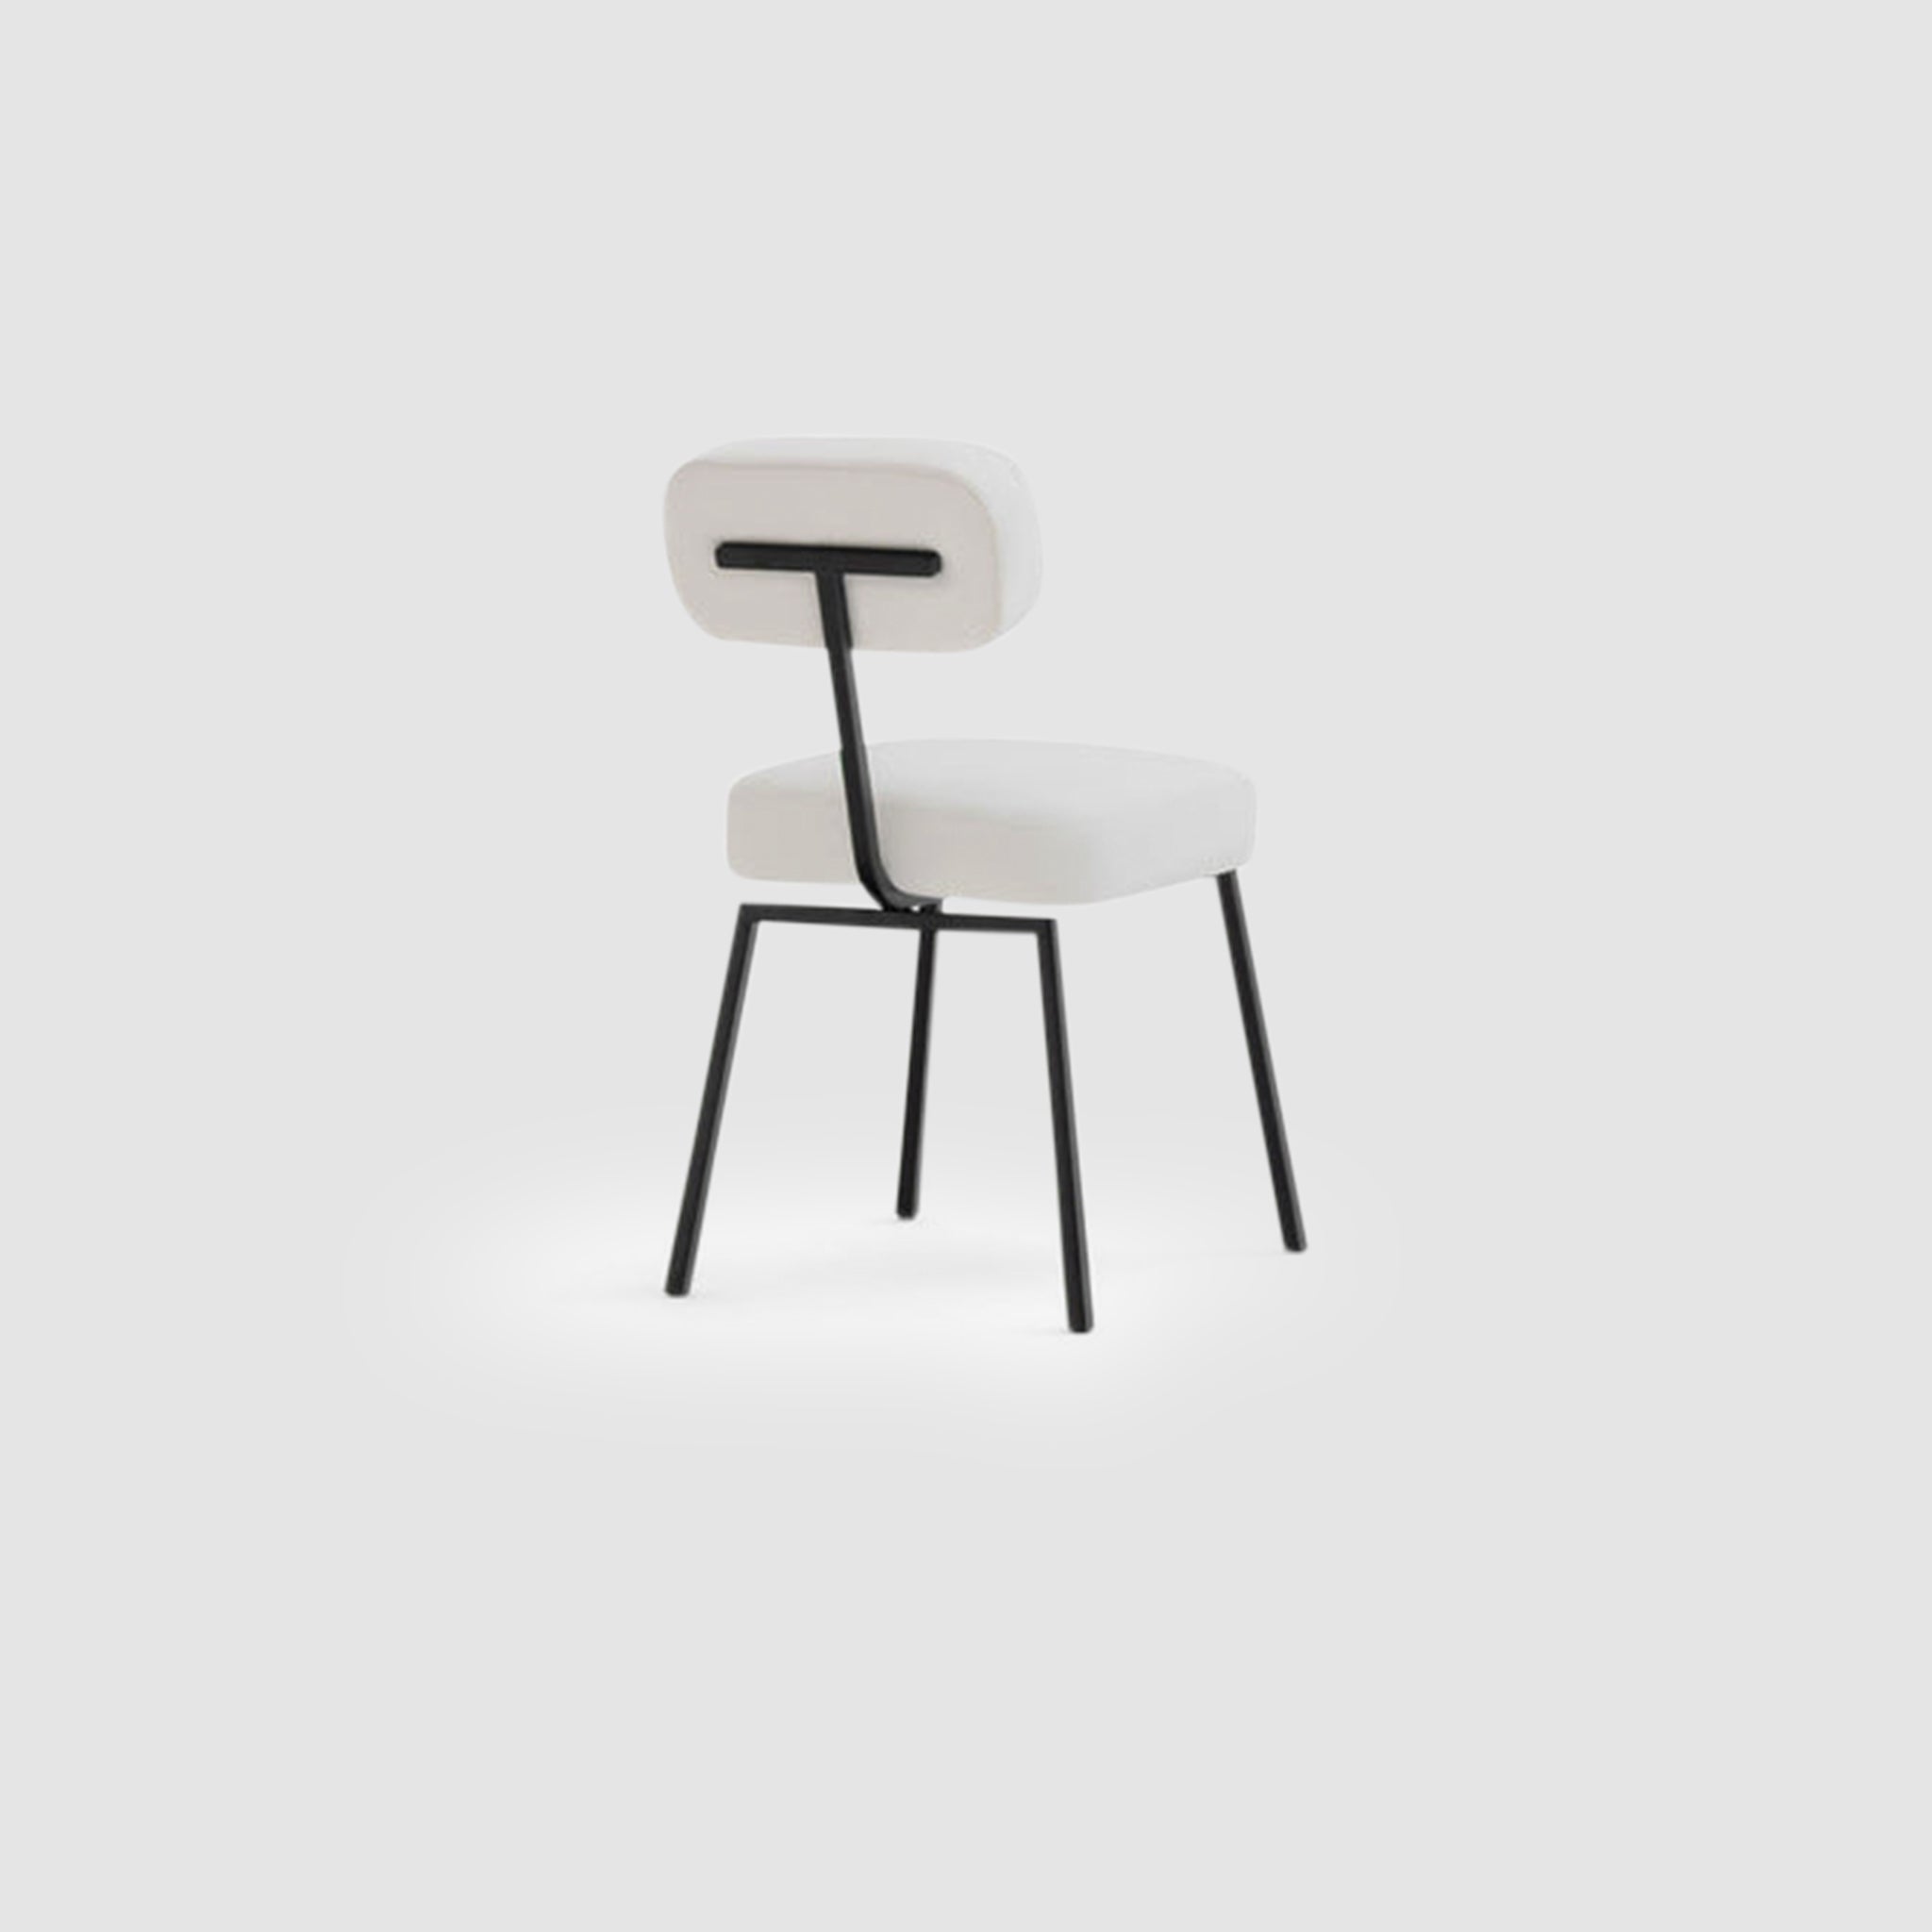 The Ida Dining Chair - modern upholstered dining chair with a black steel frame, cushioned seat, and backrest, featuring a minimalist and contemporary design.